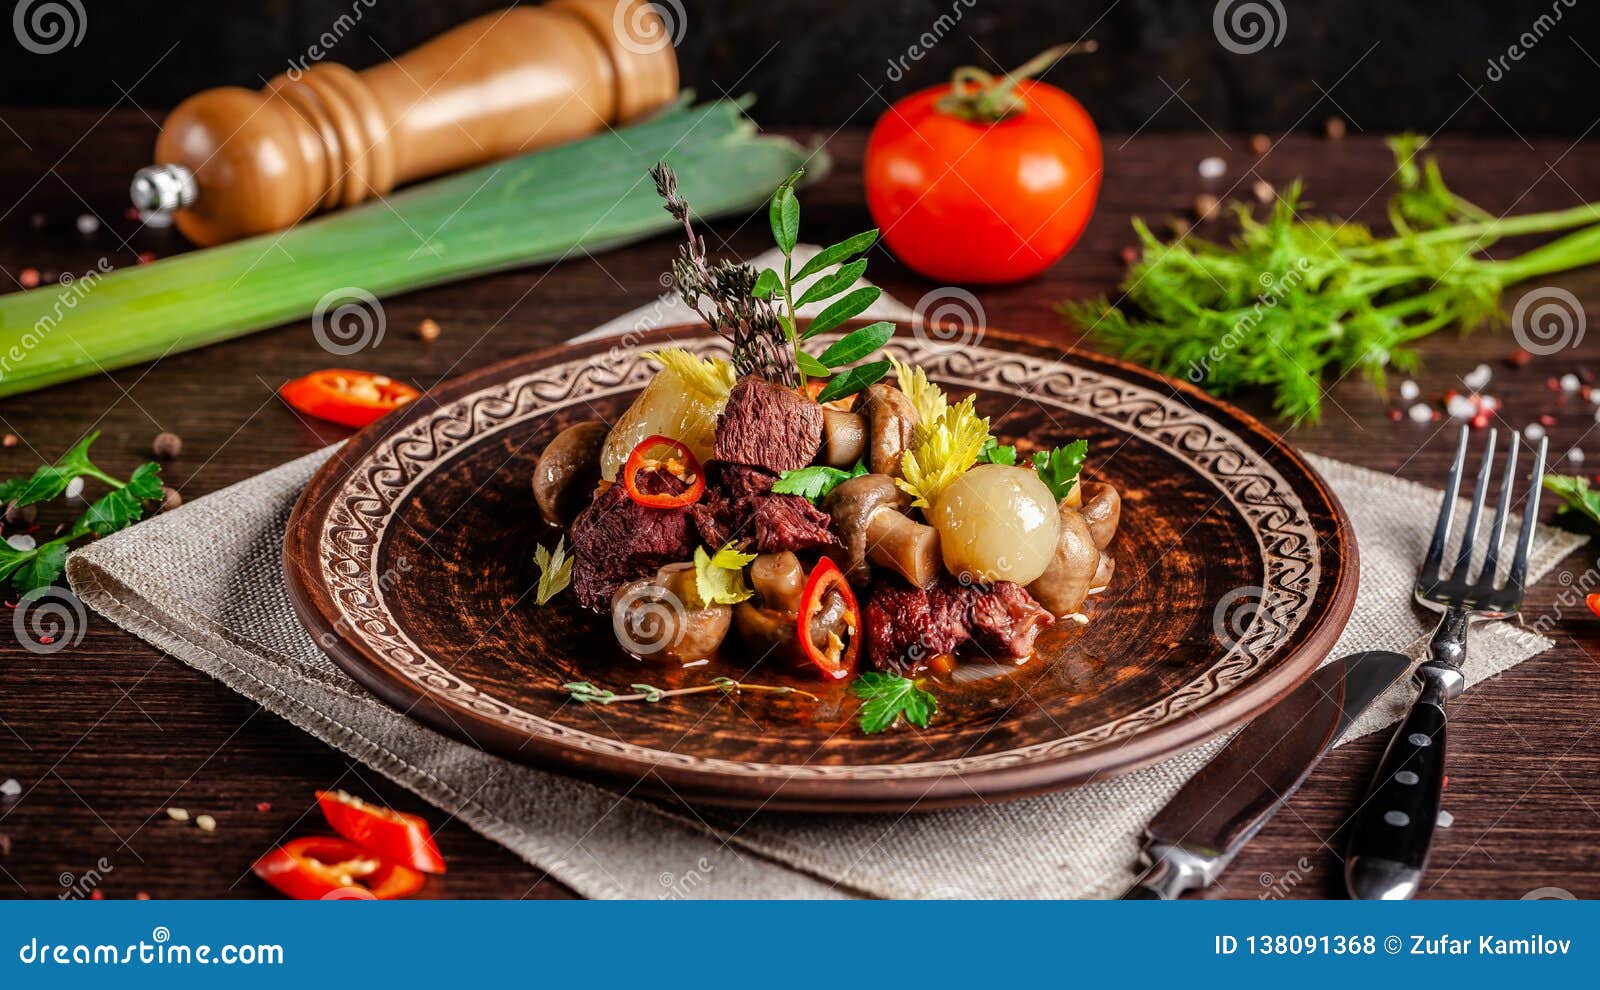 french cuisine concept. blanquette of veal with mushrooms, whole stewed onions, carrots and chilli peppers. serving dishes